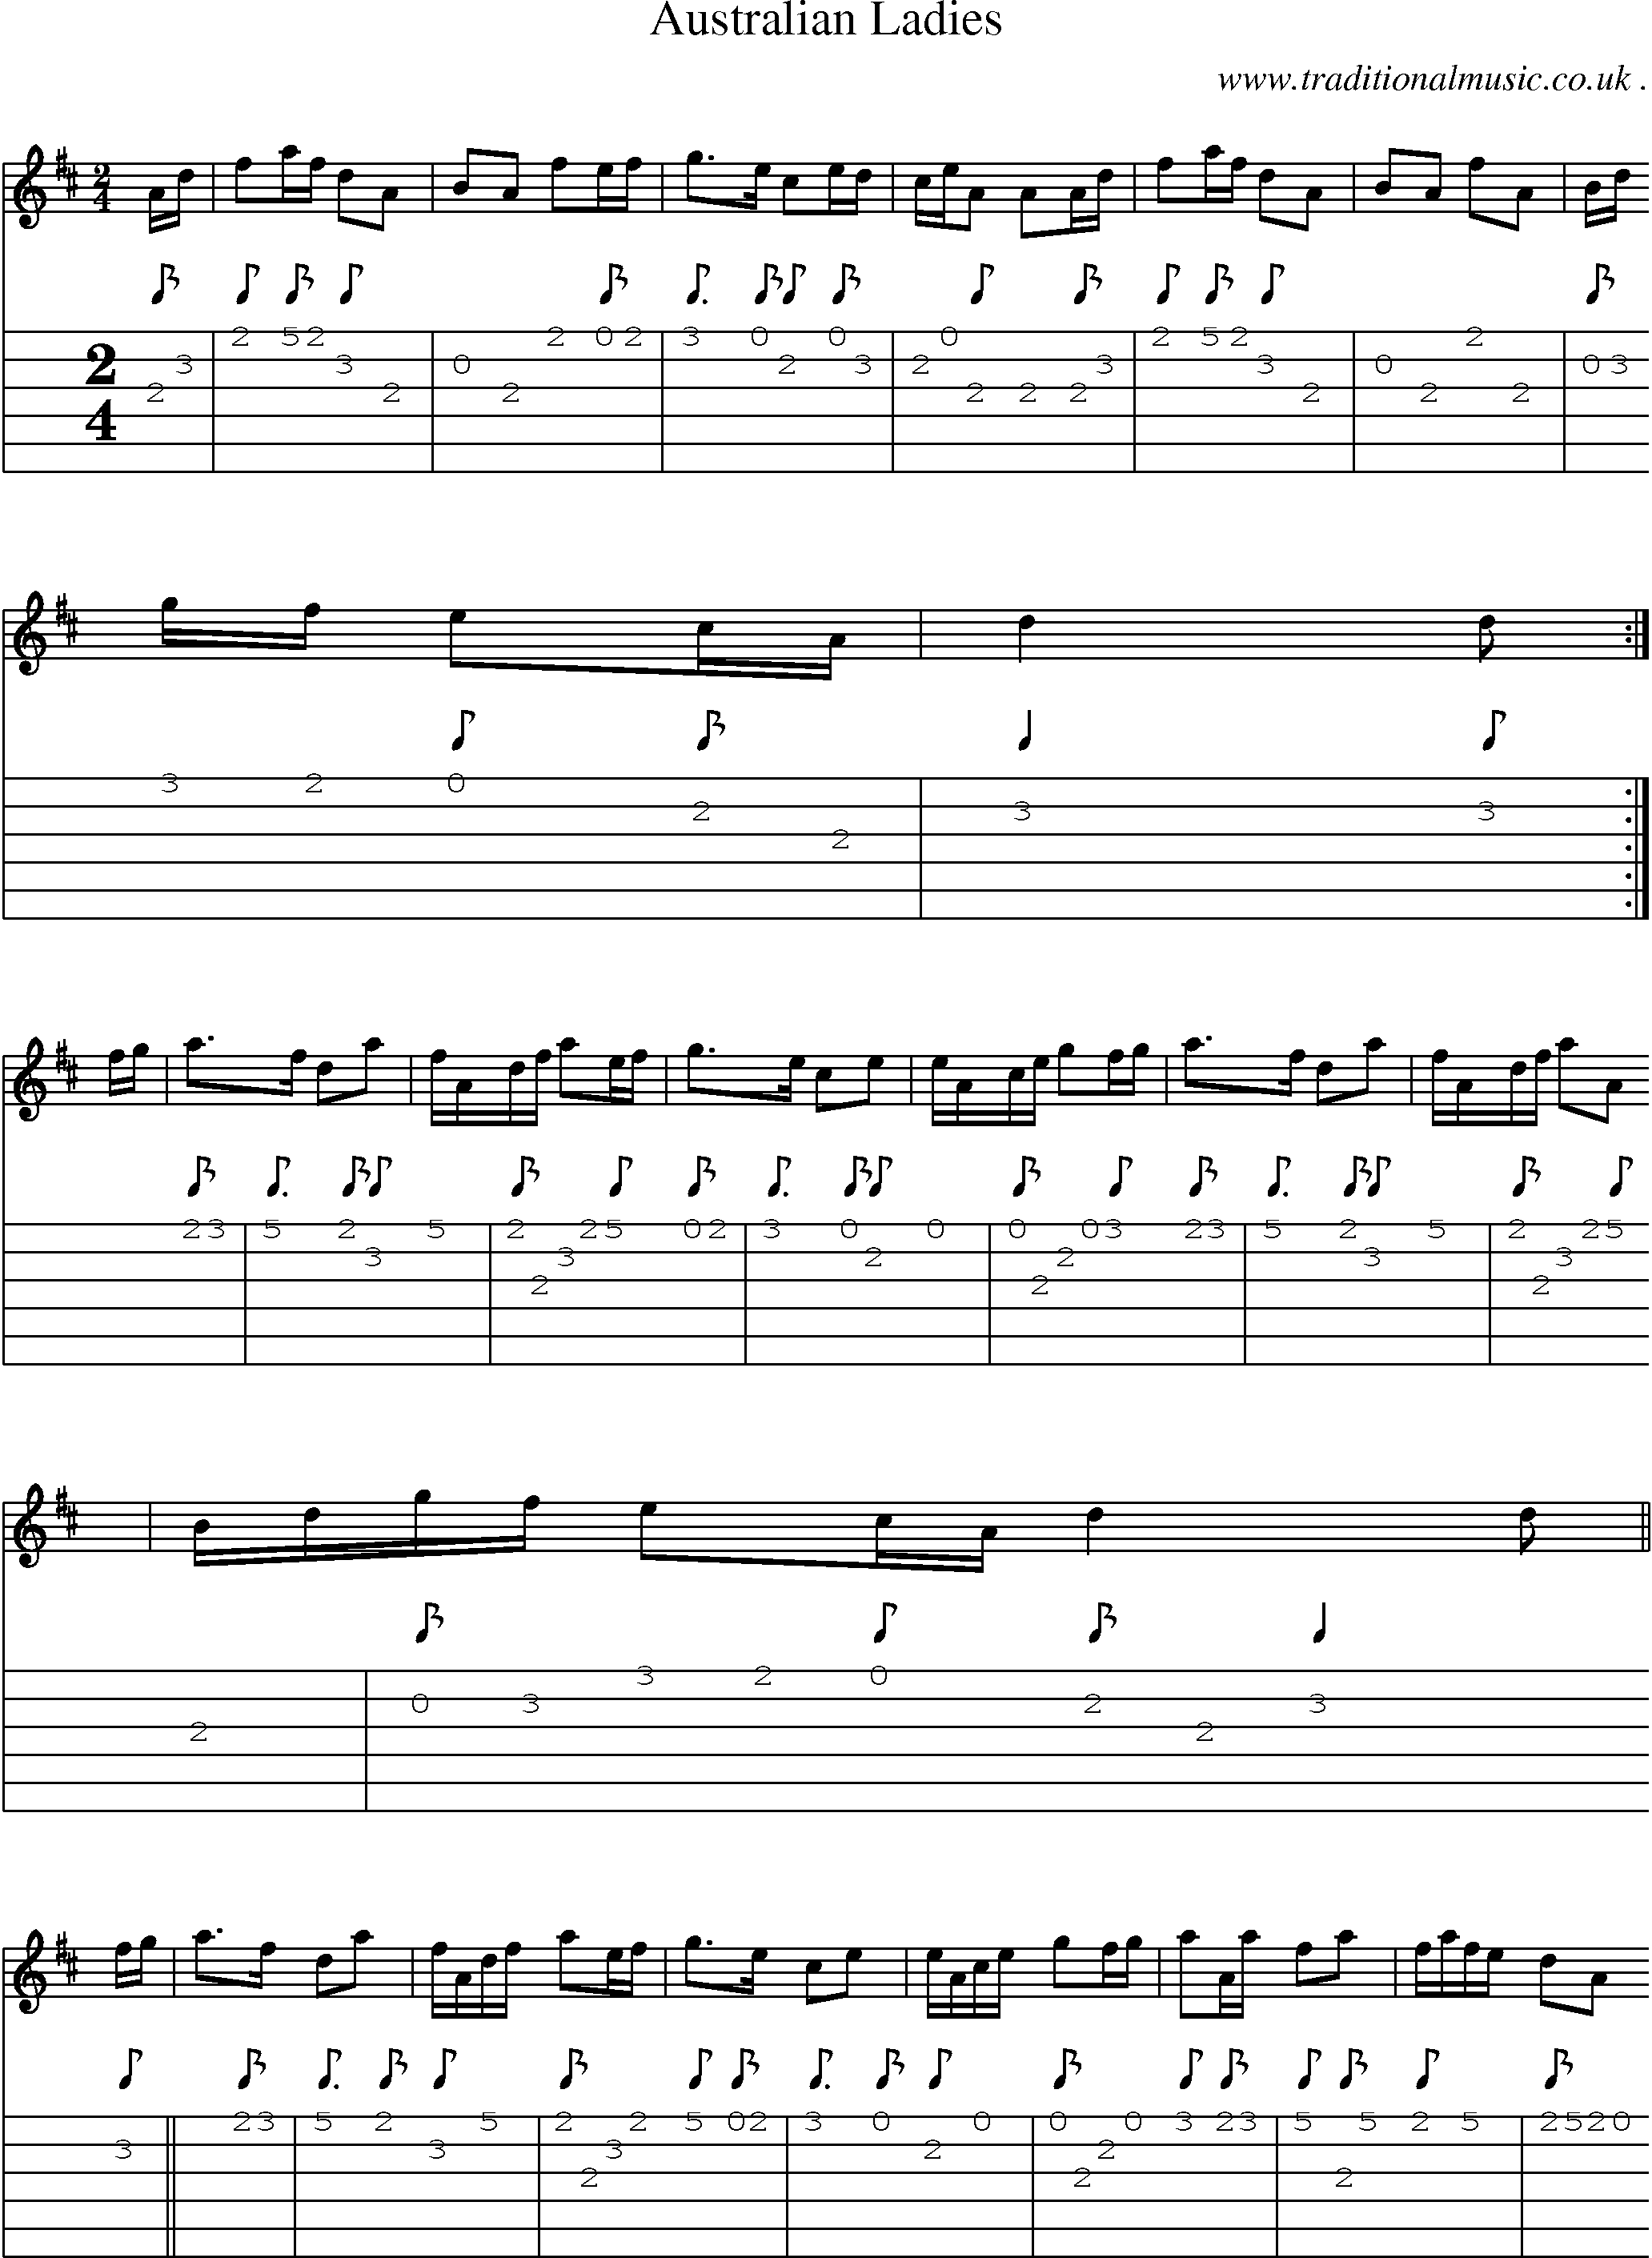 Sheet-music  score, Chords and Guitar Tabs for Australian Ladies